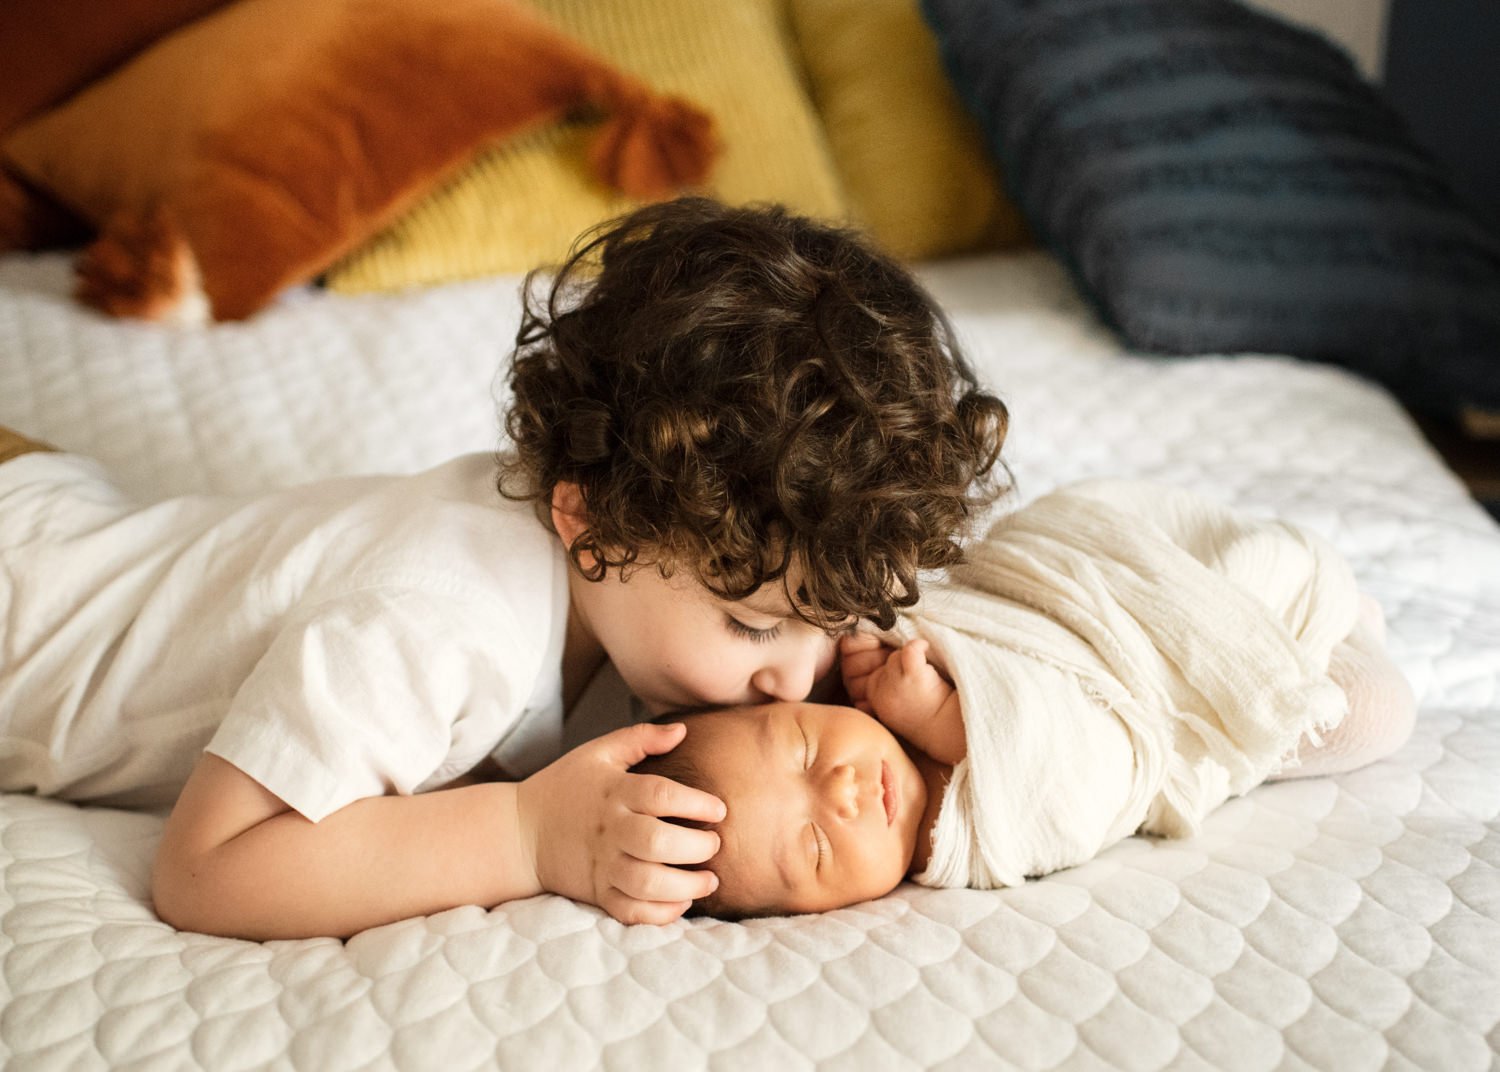 Sibling and Newborn Photography at Home